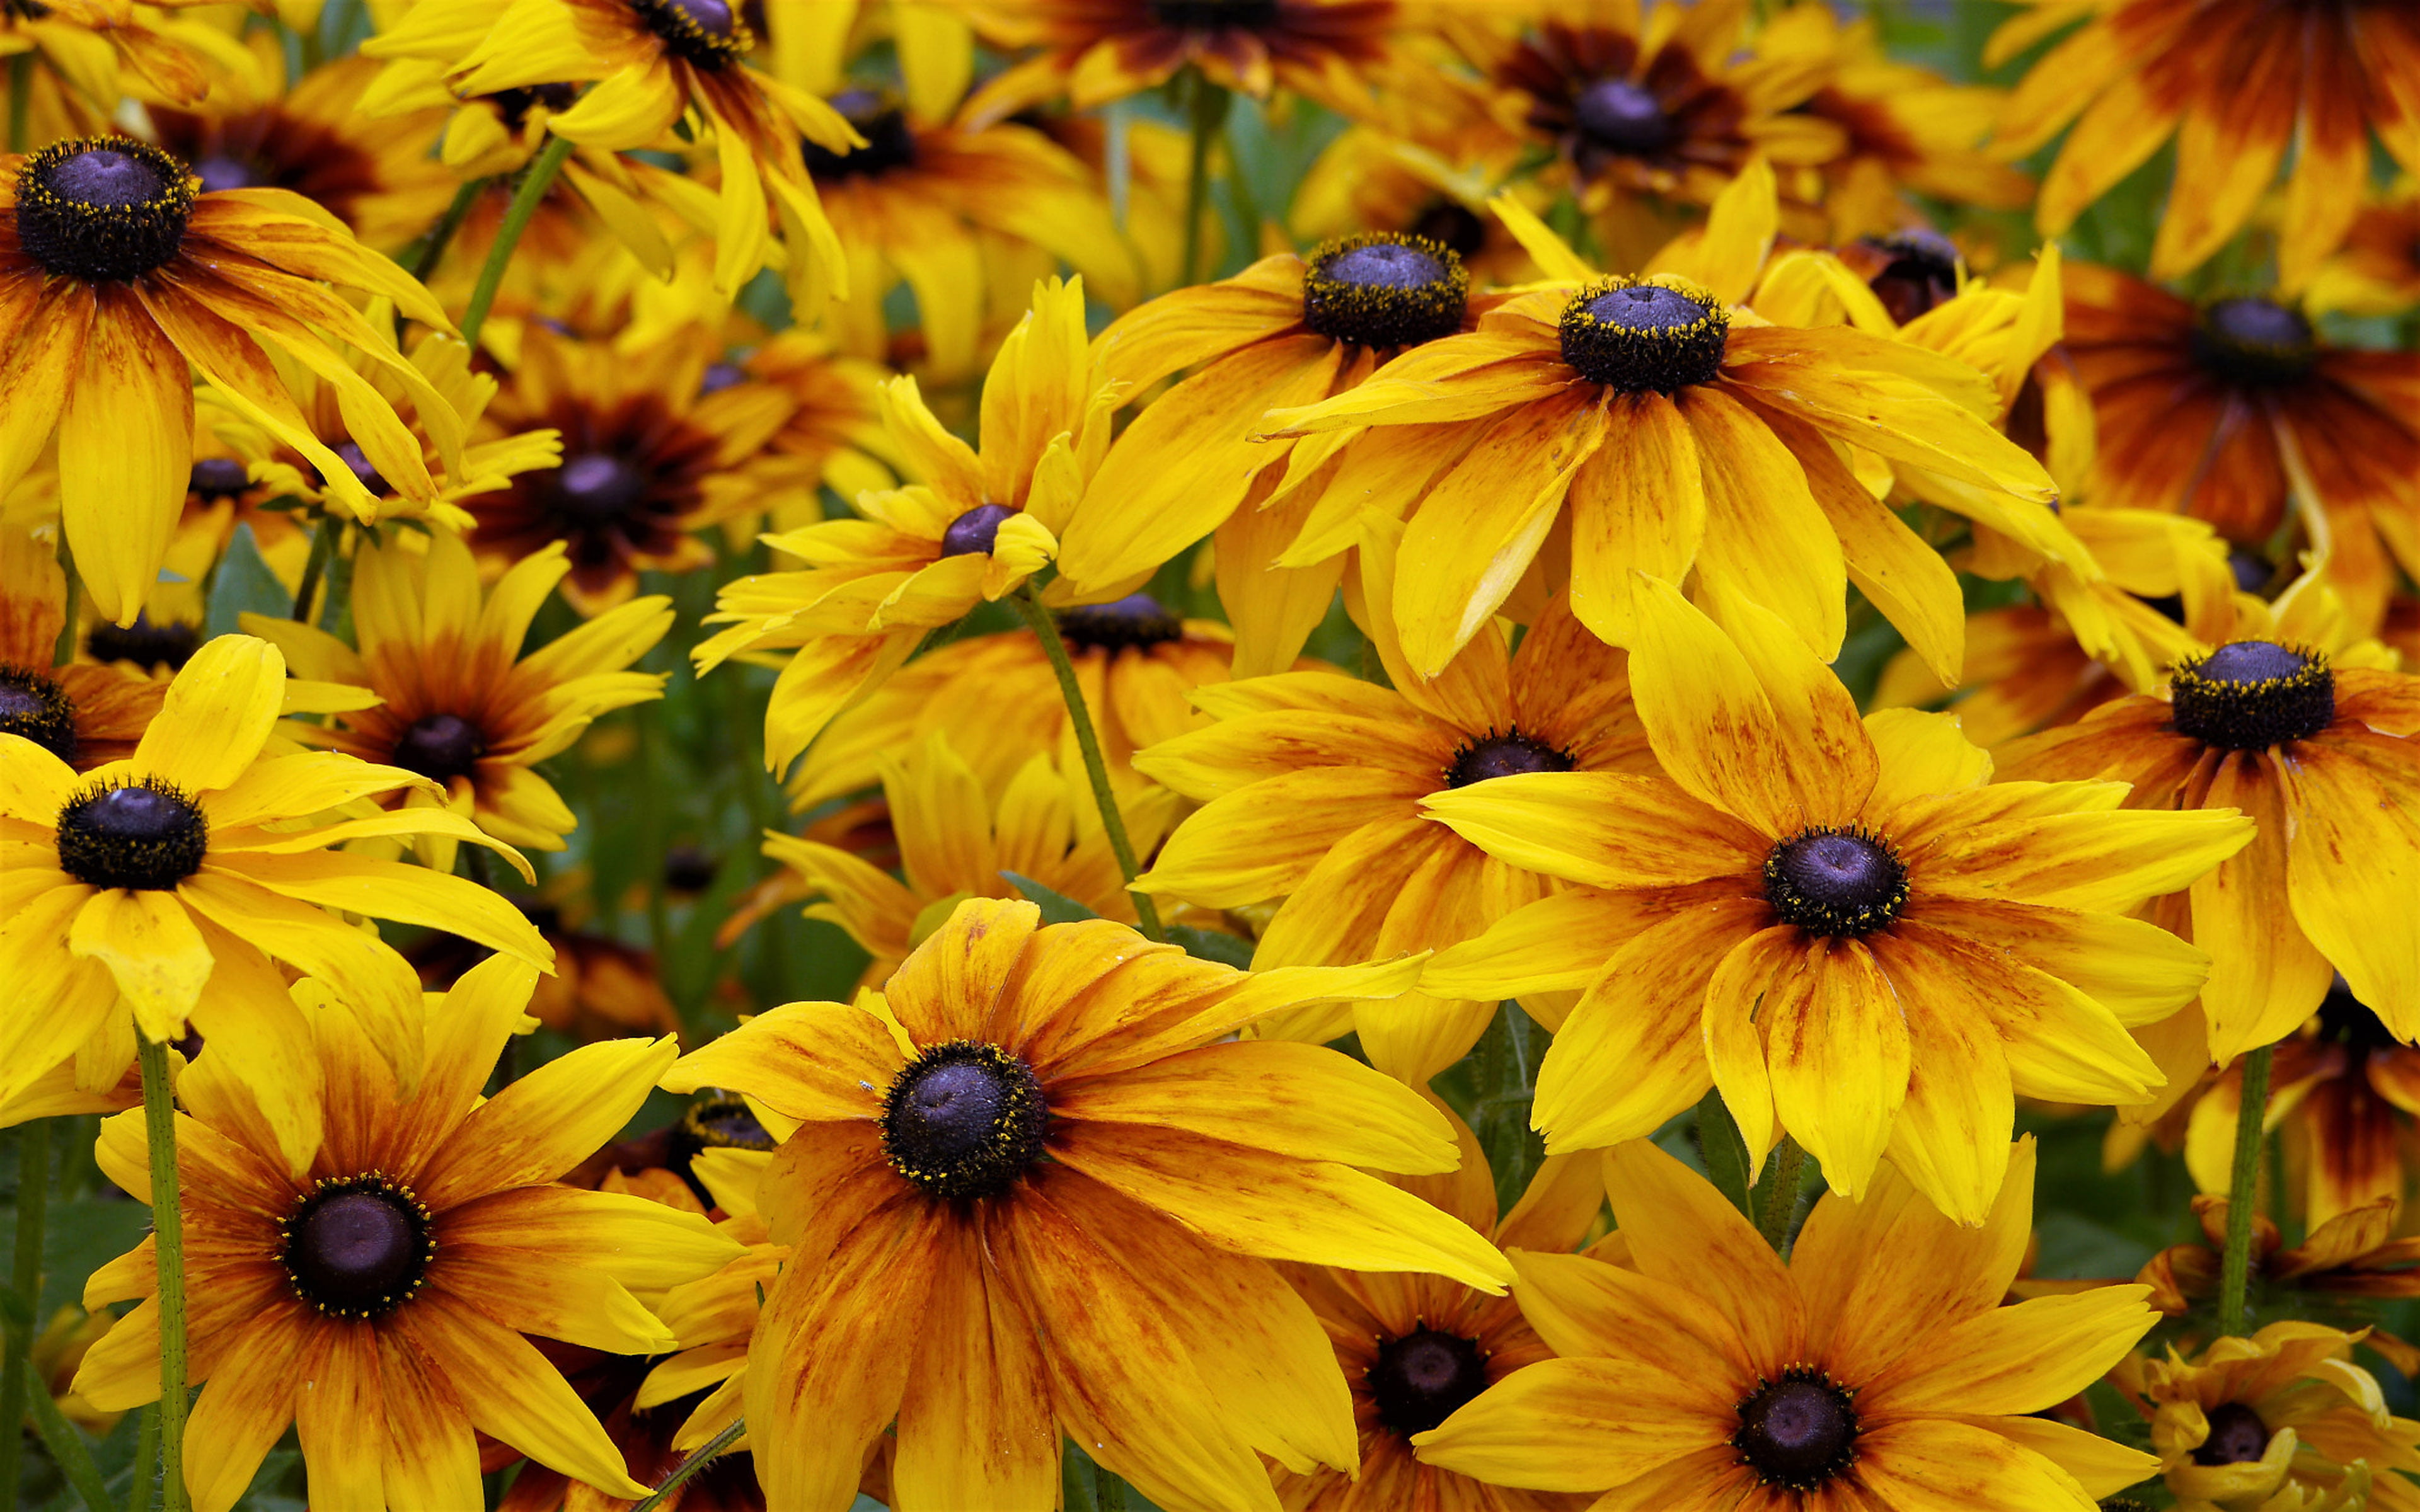 Plants Black Eyed Susan Rudbeckia Hirta Is A North American Flowering Plant Hd Wallpapers For Mobile Phones Tablet And Laptop 3840×2400